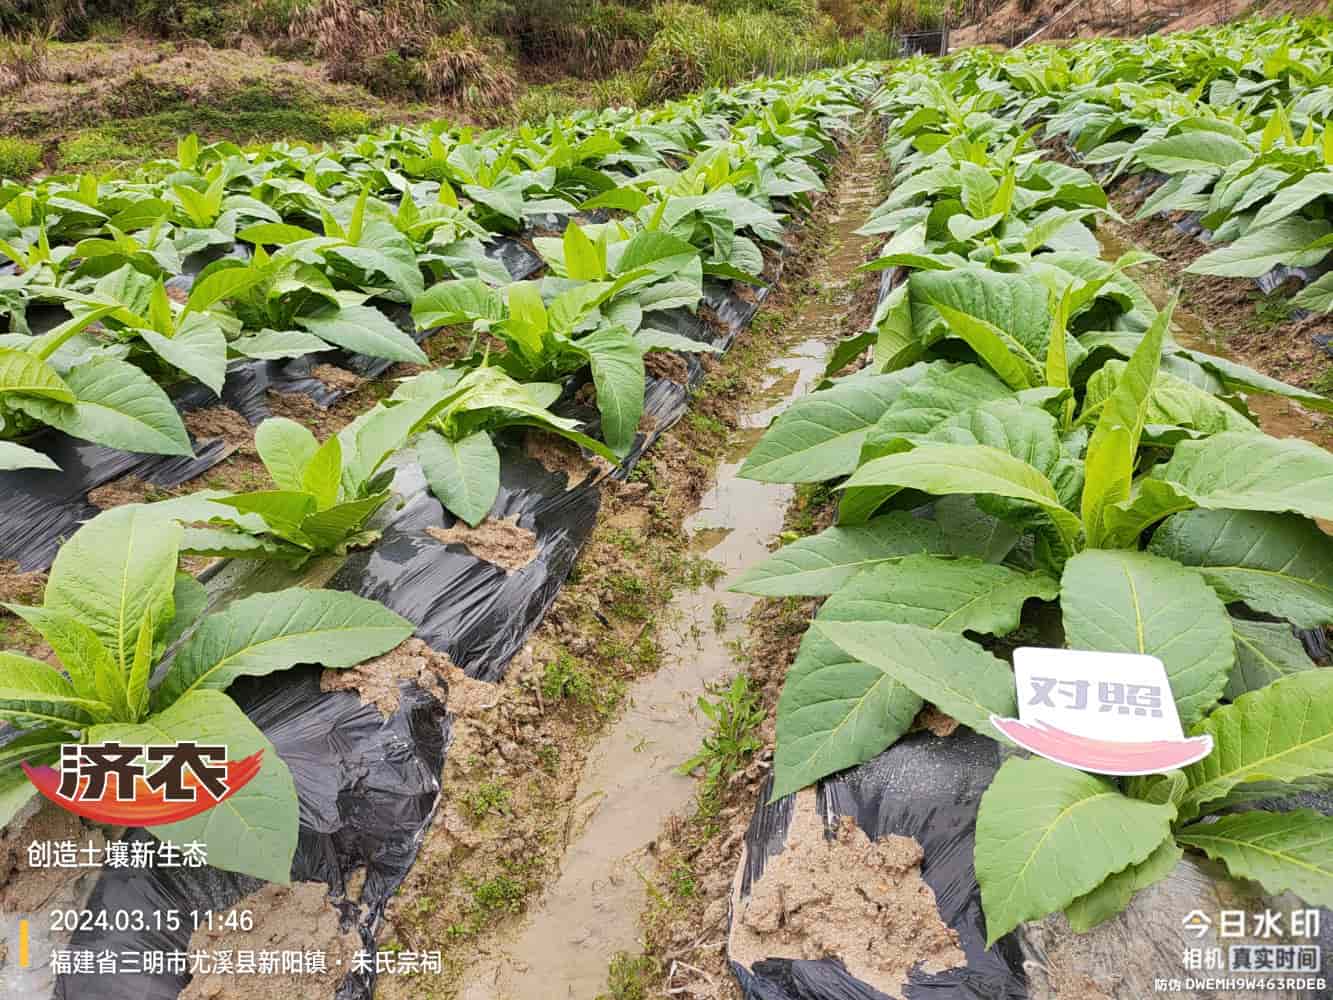 The Effect of Using Jinan Agricultural Products in Fujian Flue-cured Tobacco(图2)